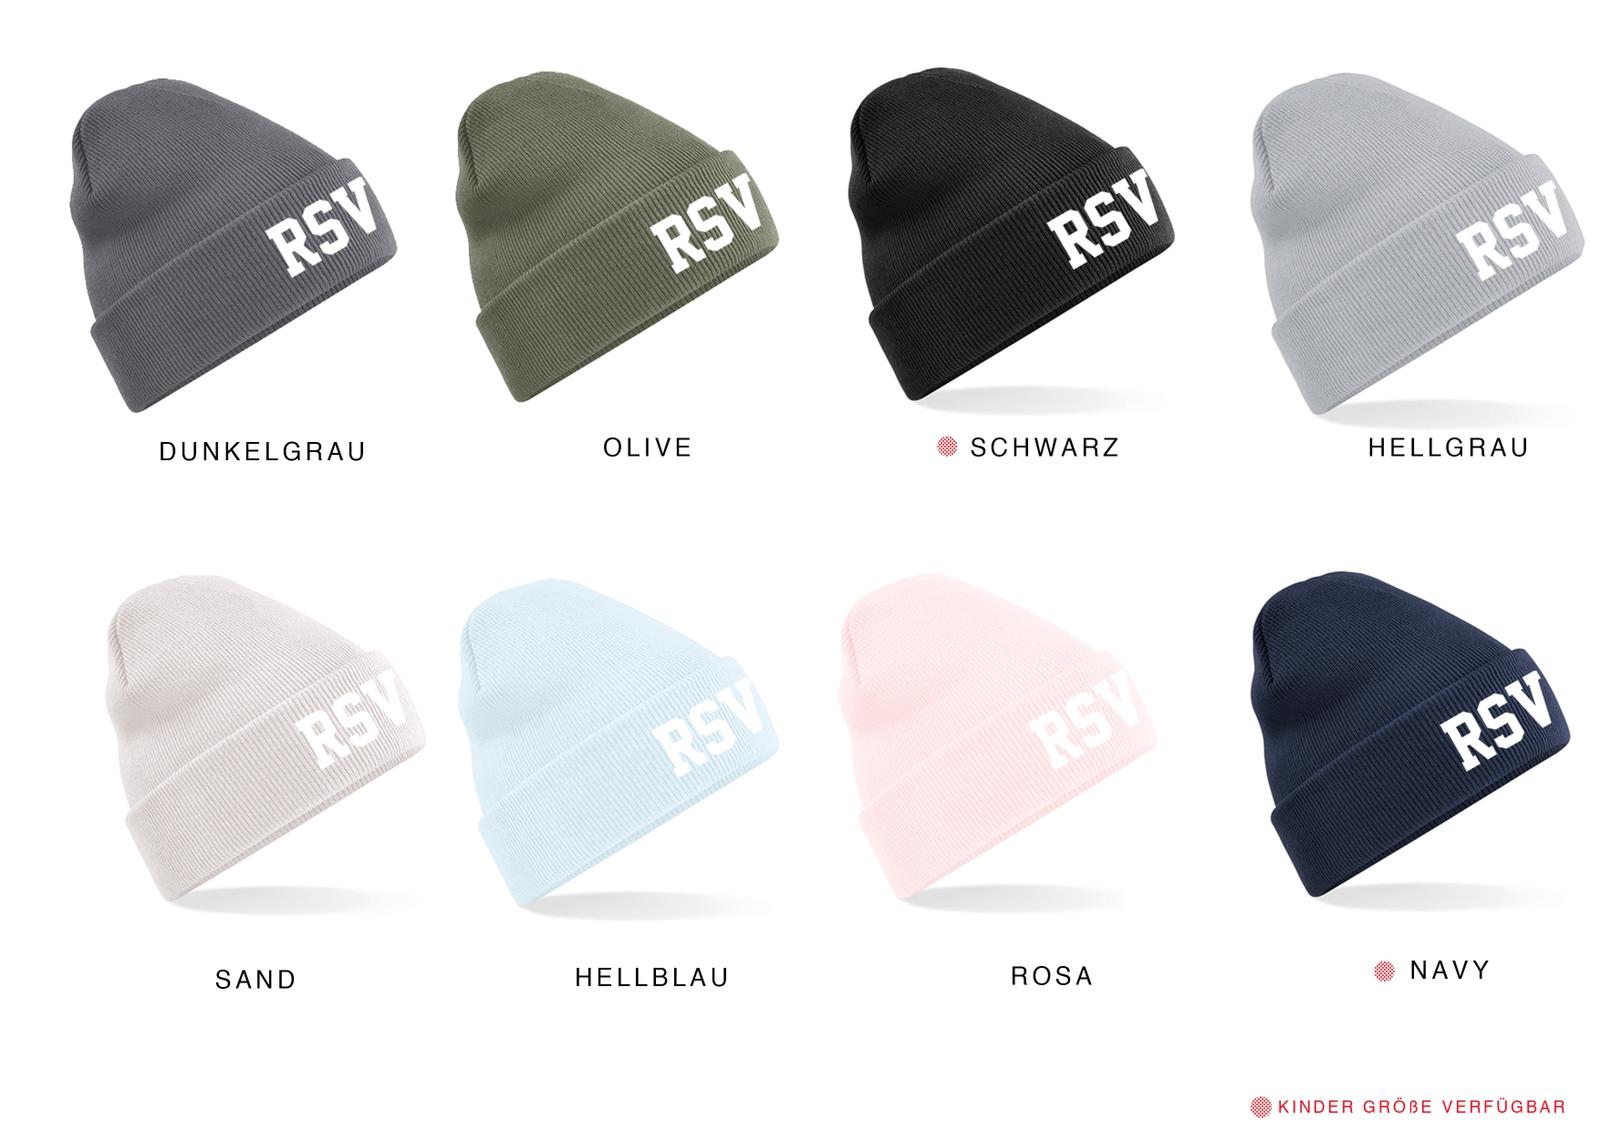 You are currently viewing Neues Produkt im RSV-Shop – Beanies!